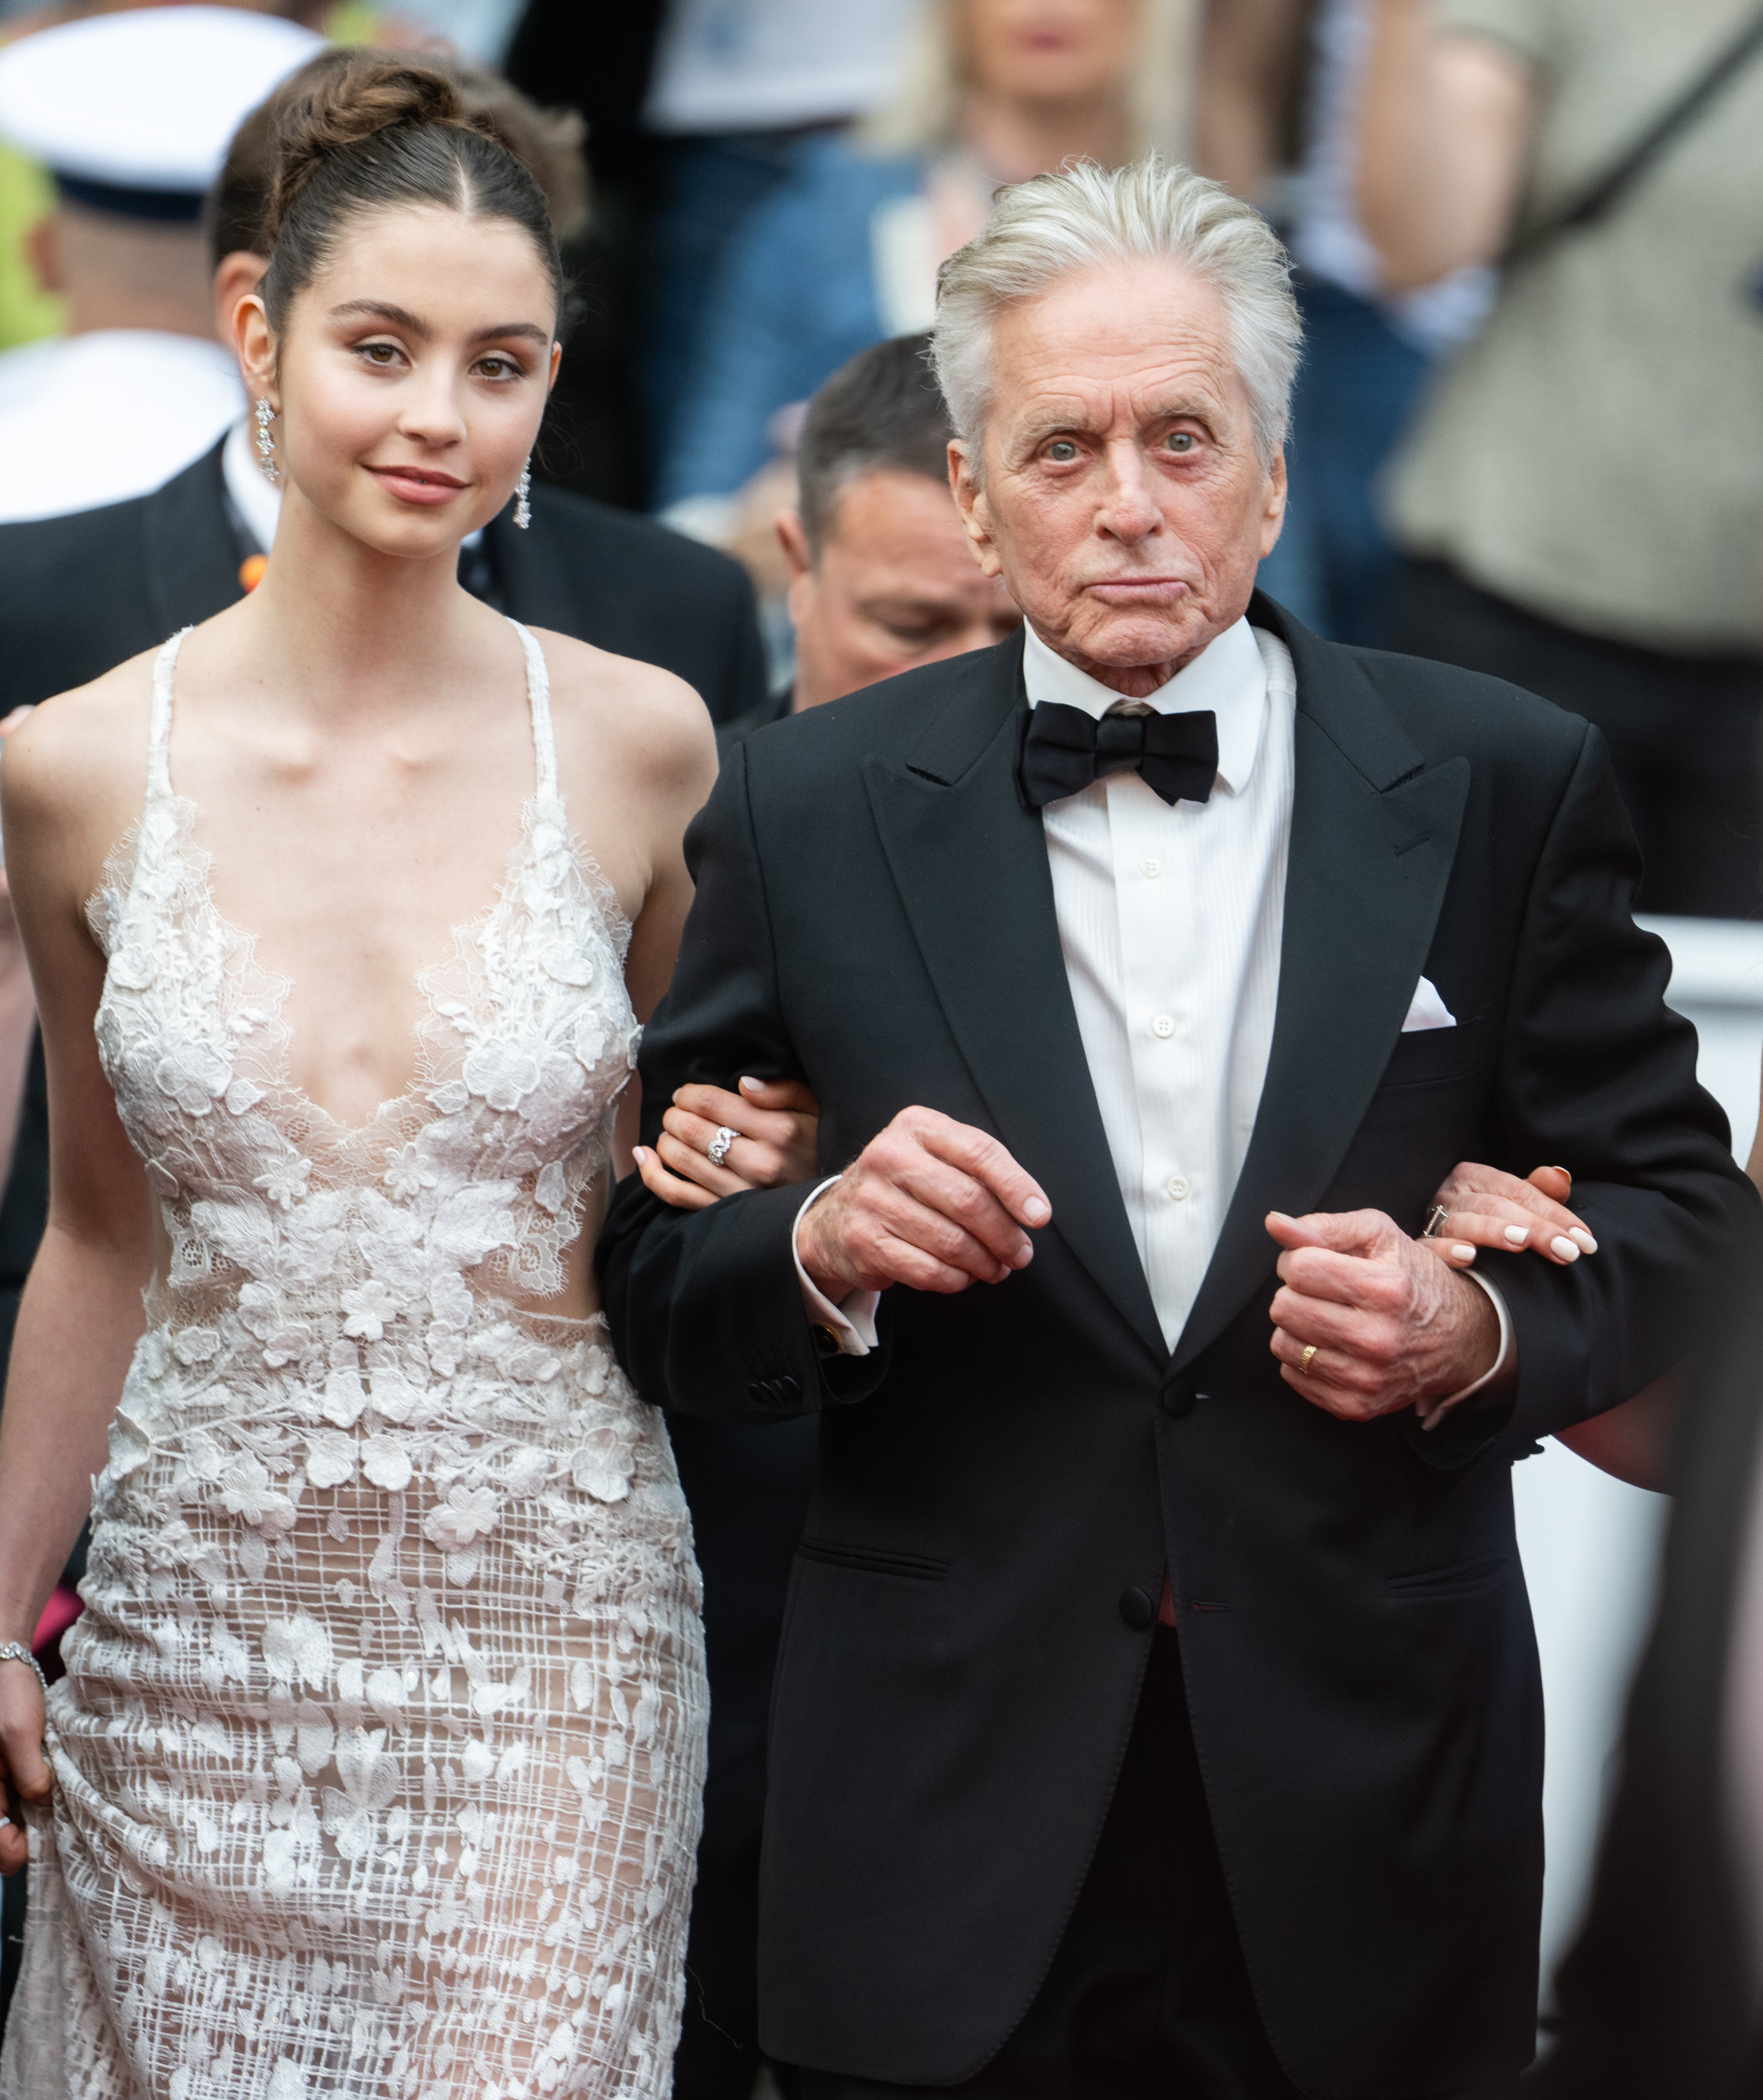 Michael Douglas and daughter Carys at the 76th annual Cannes film festival on May 16, 2023 | Source: Getty Images